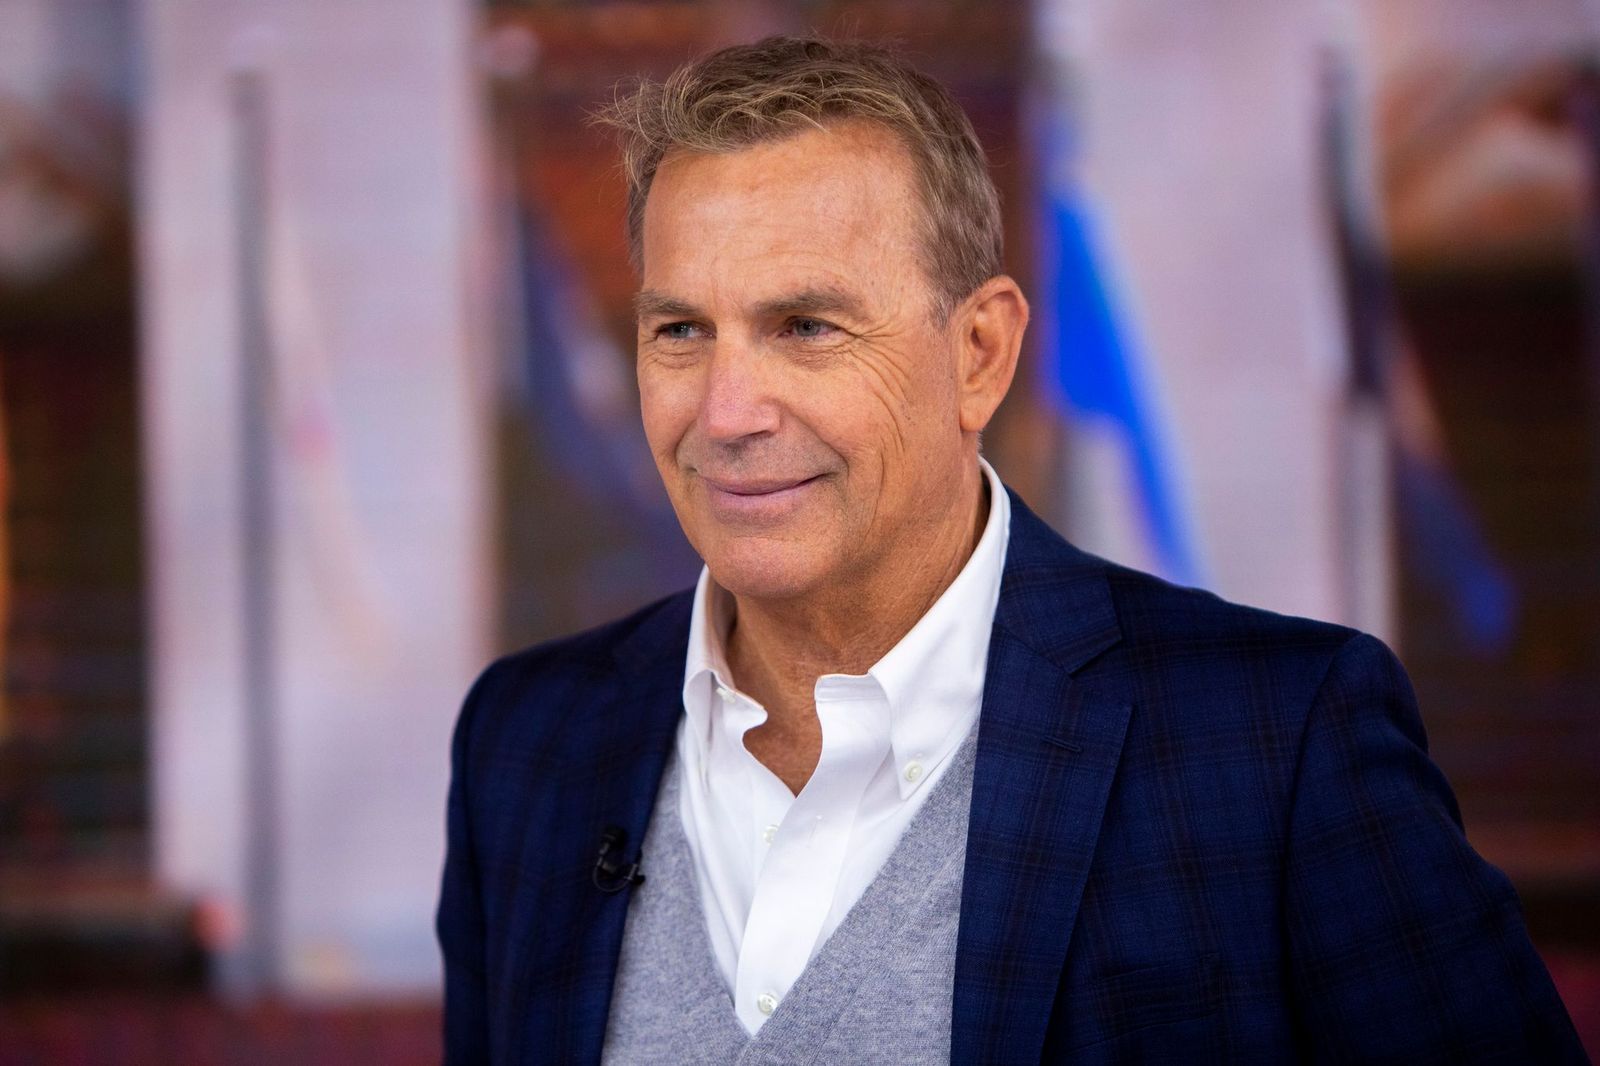 Kevin Costner photographed on the "Today" show on March 28, 2019 | Photo: Zach Pagano/NBCU Photo Bank/NBCUniversal/Getty Images